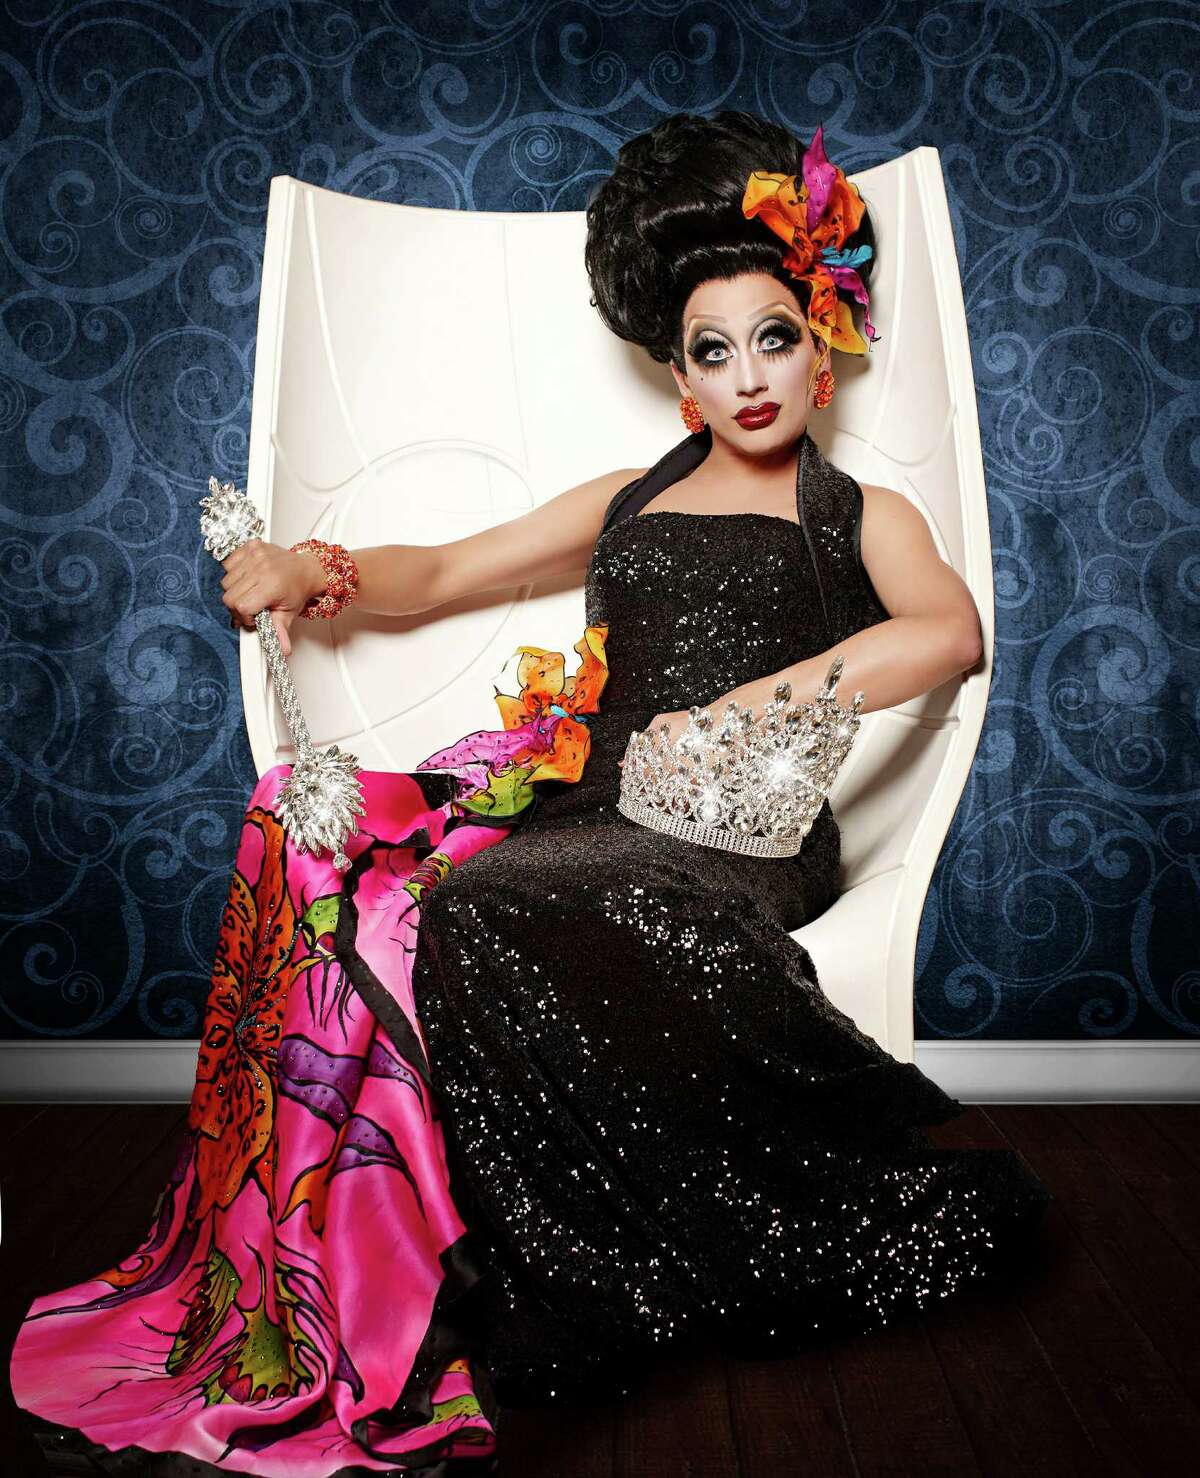 Bianca Del Rio, who has competed in "RuPaul's Drag Race